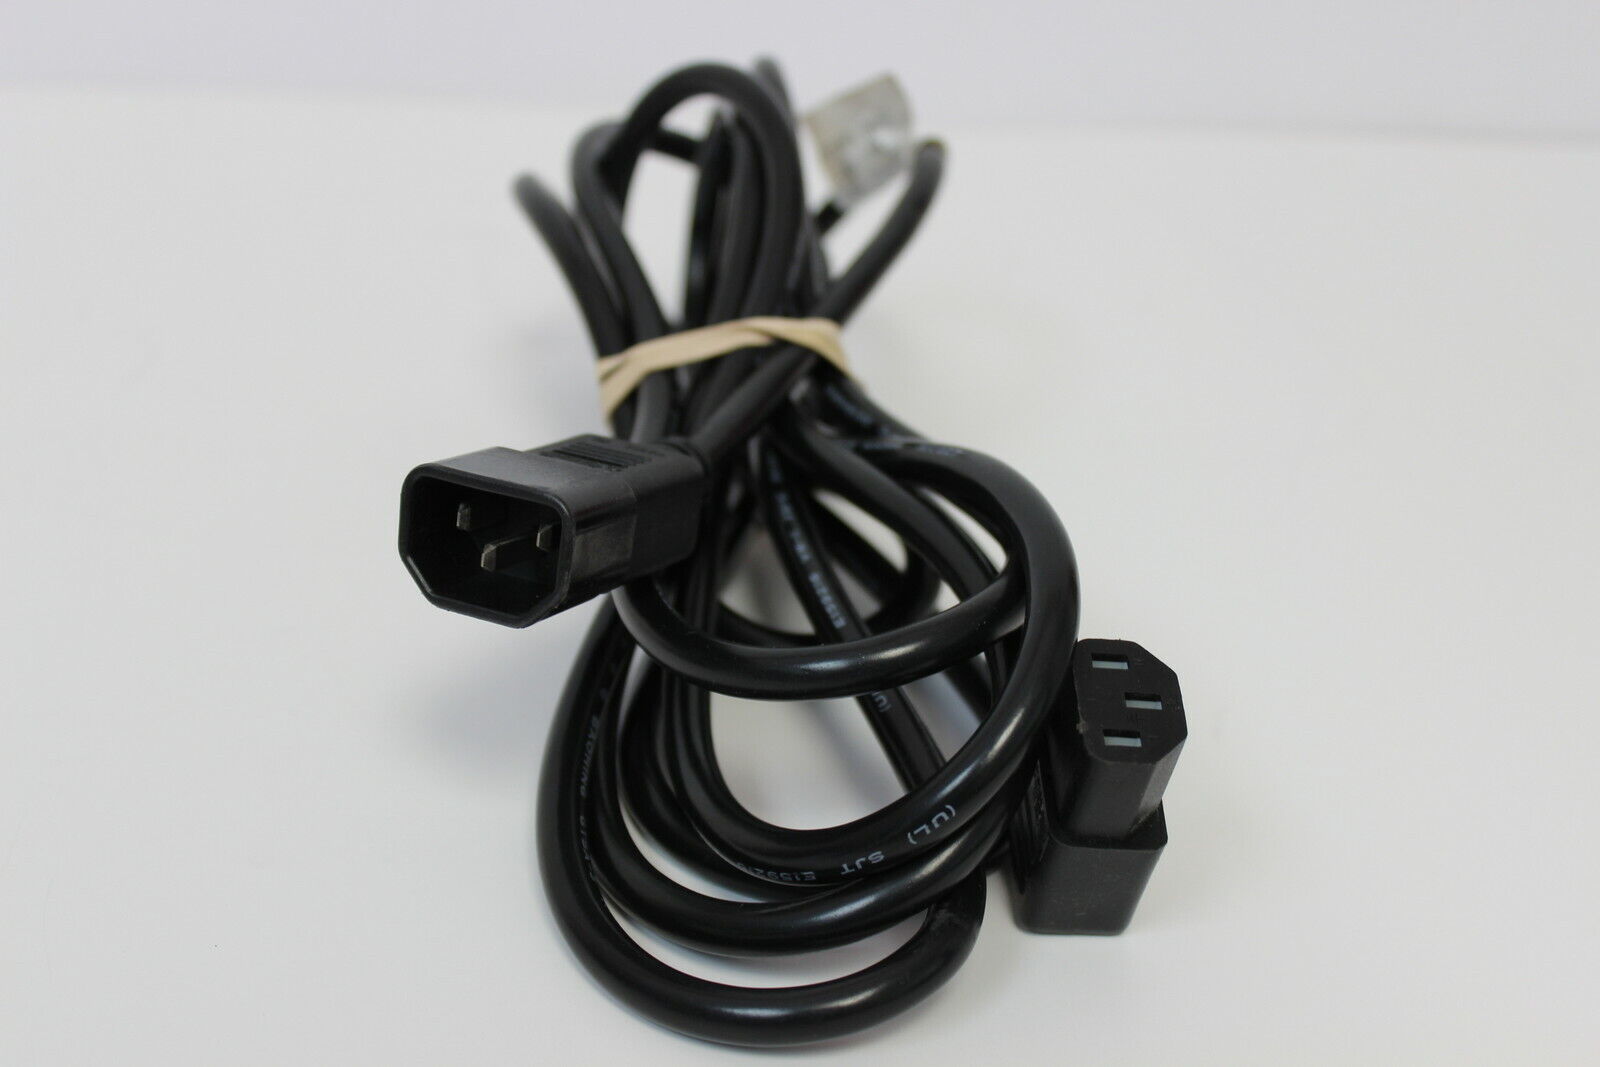 IBM 00P2401 6282 6283 POWER CORD C12 TO C14 4.3M POWER CABLE